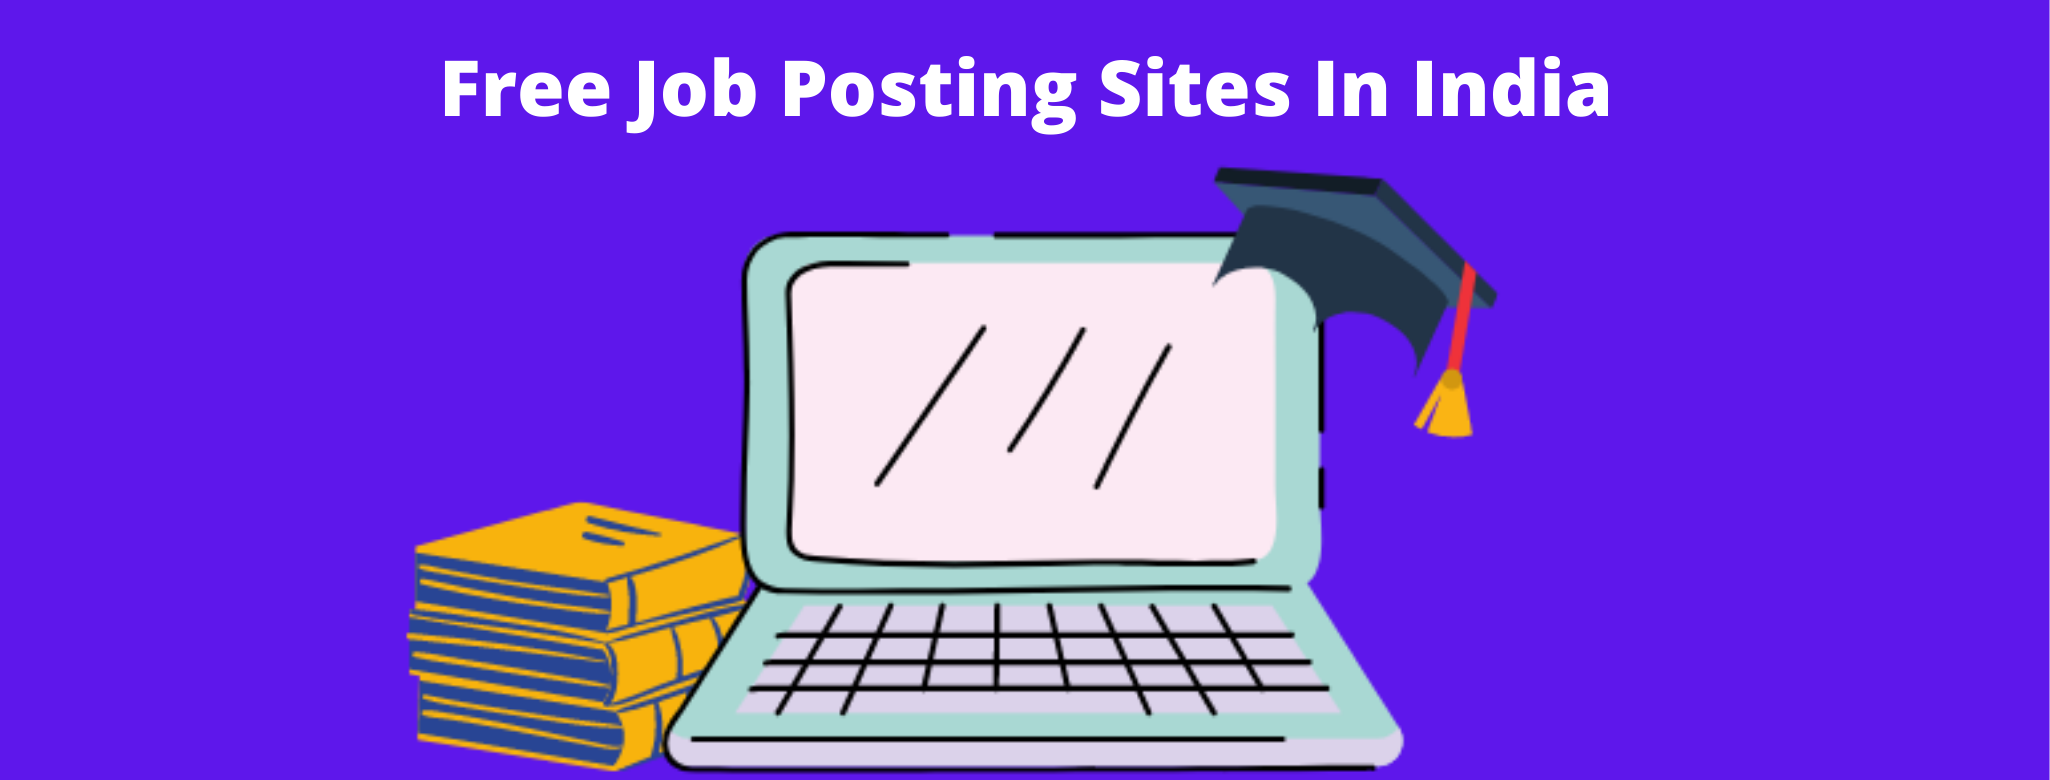 Free Job Posting Services in India_303.png